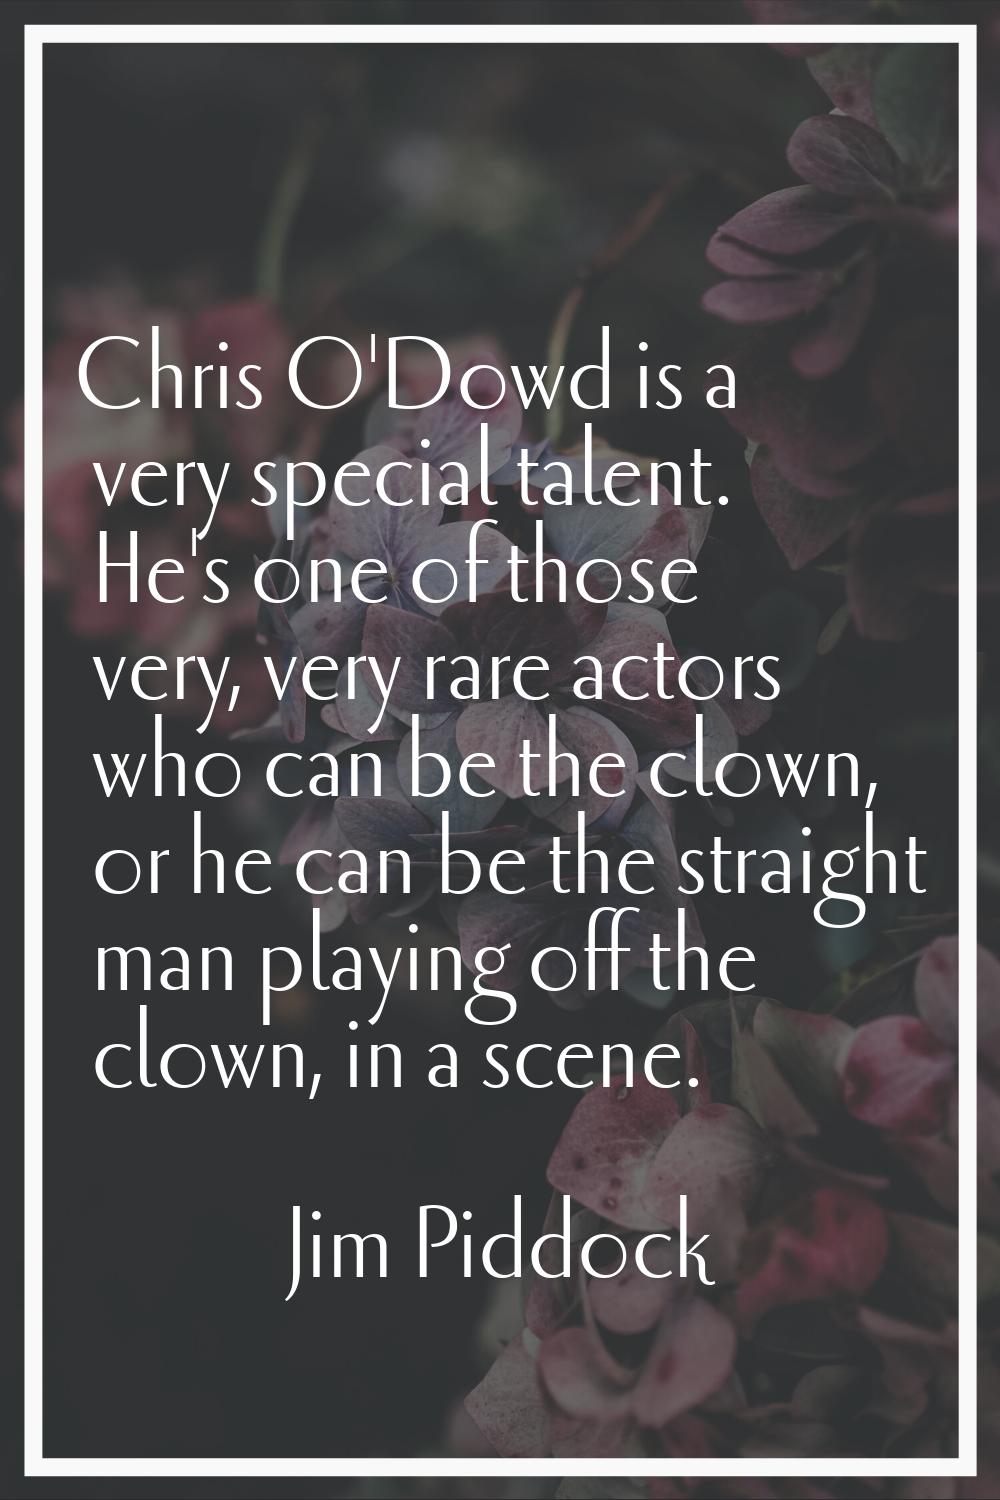 Chris O'Dowd is a very special talent. He's one of those very, very rare actors who can be the clow